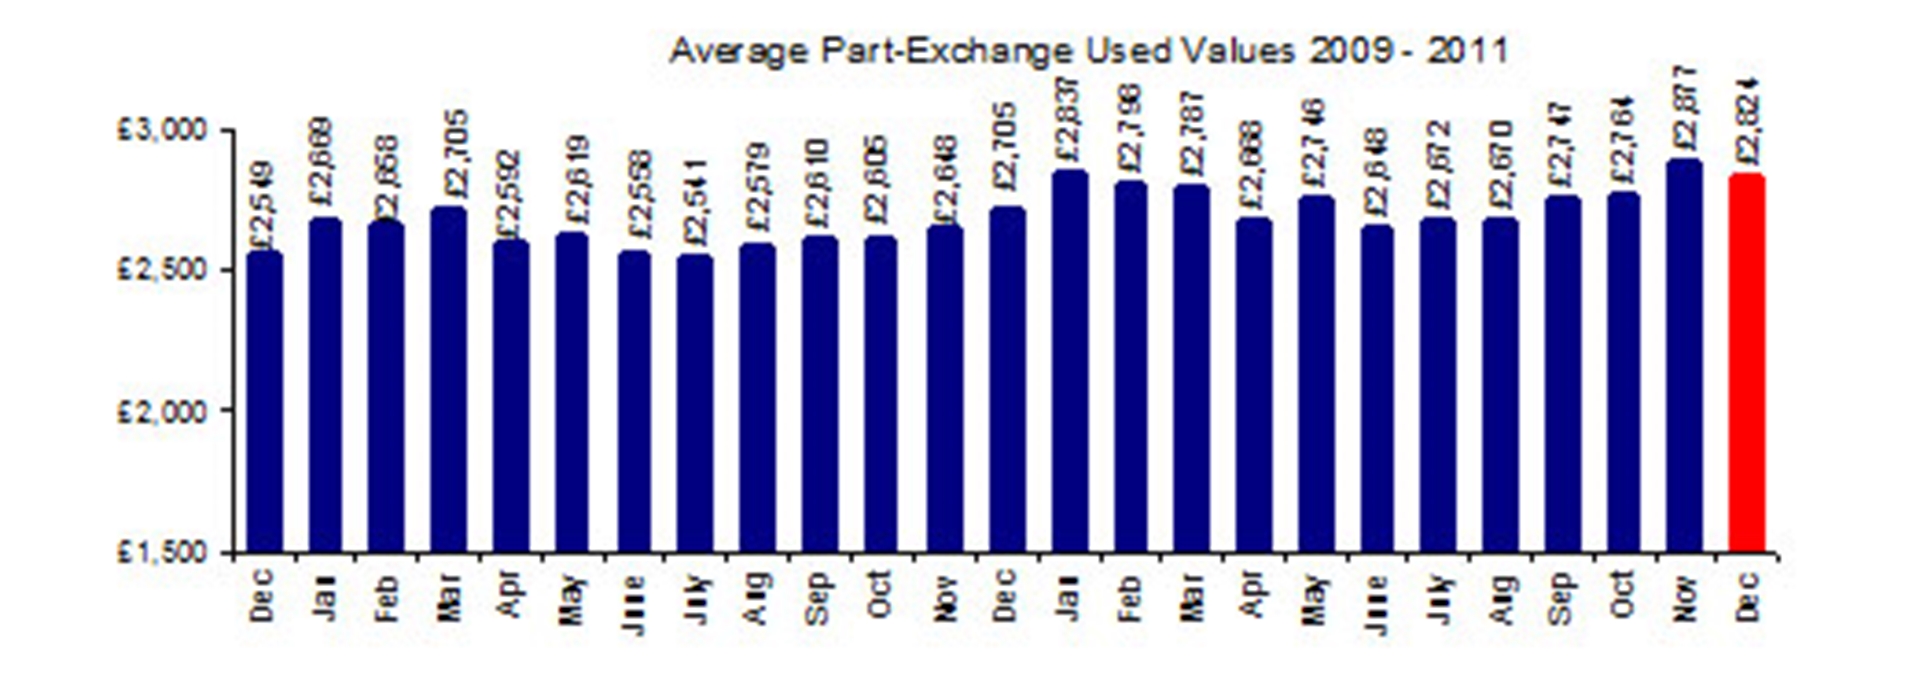 The part-exchange sector 